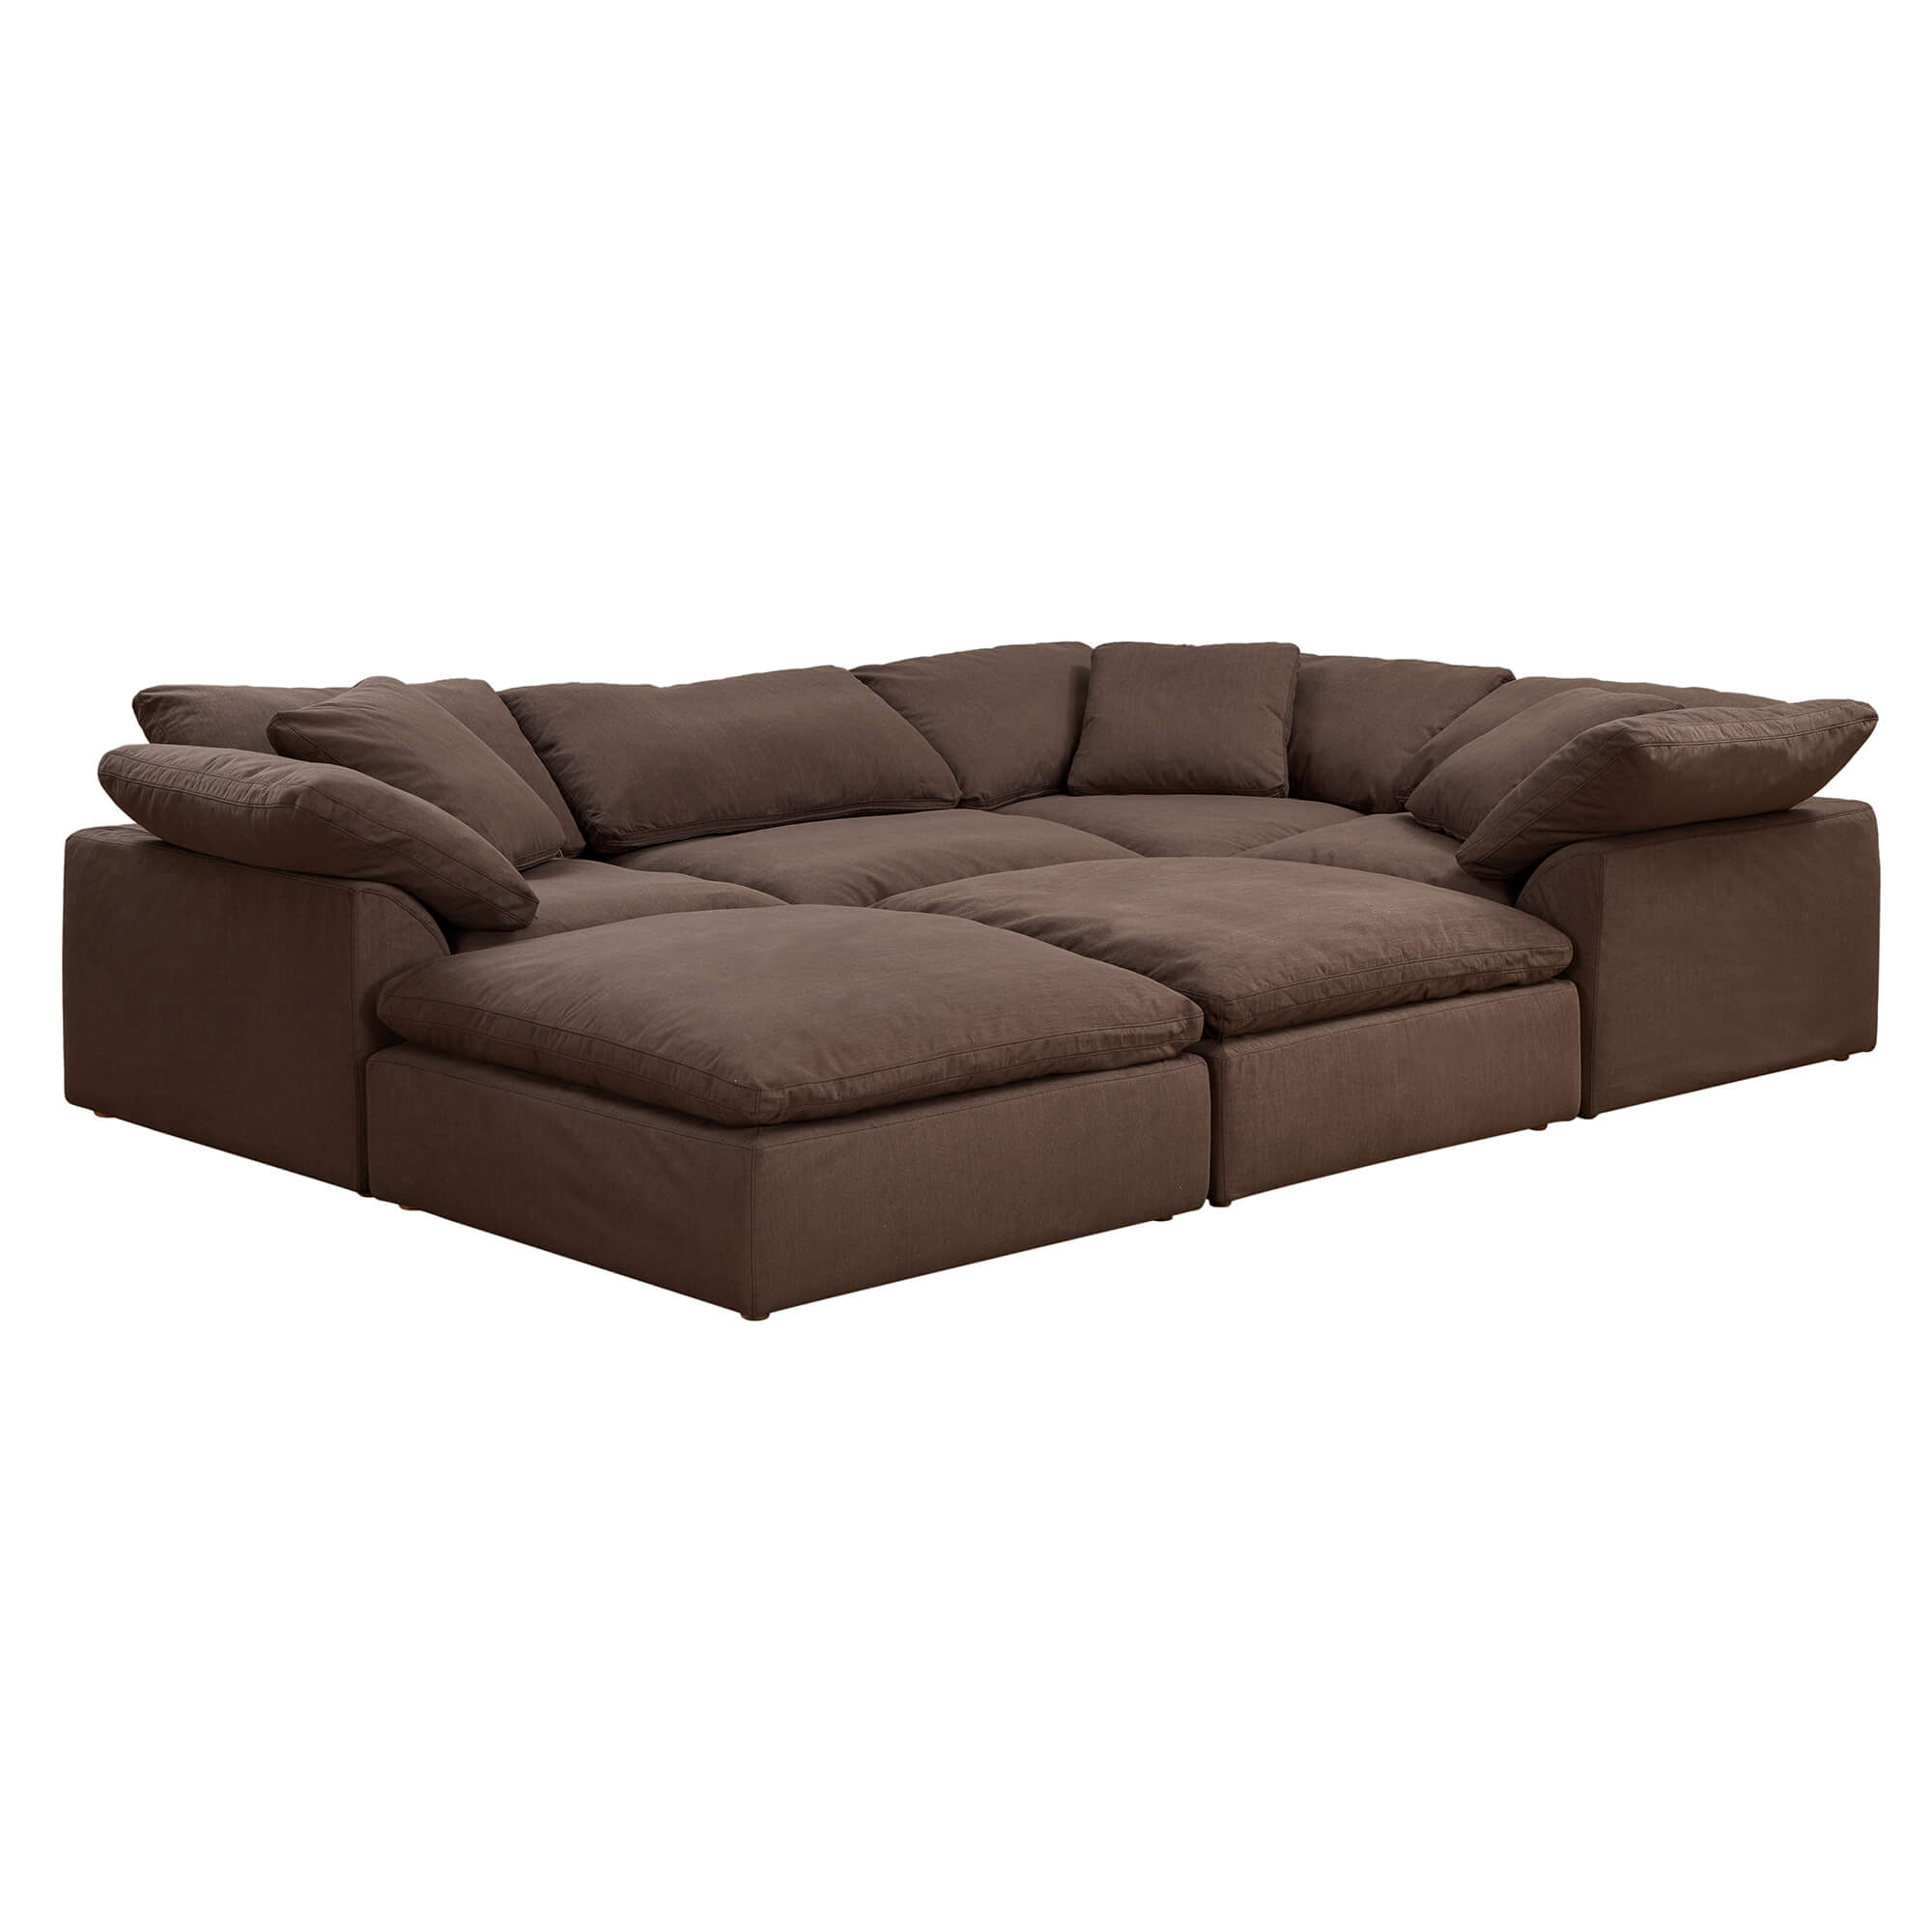 Puff Slipcovered 6 PC Modular Sofa Sectional Pit with Two Ottomans - Color  391088 - Sunset Trading